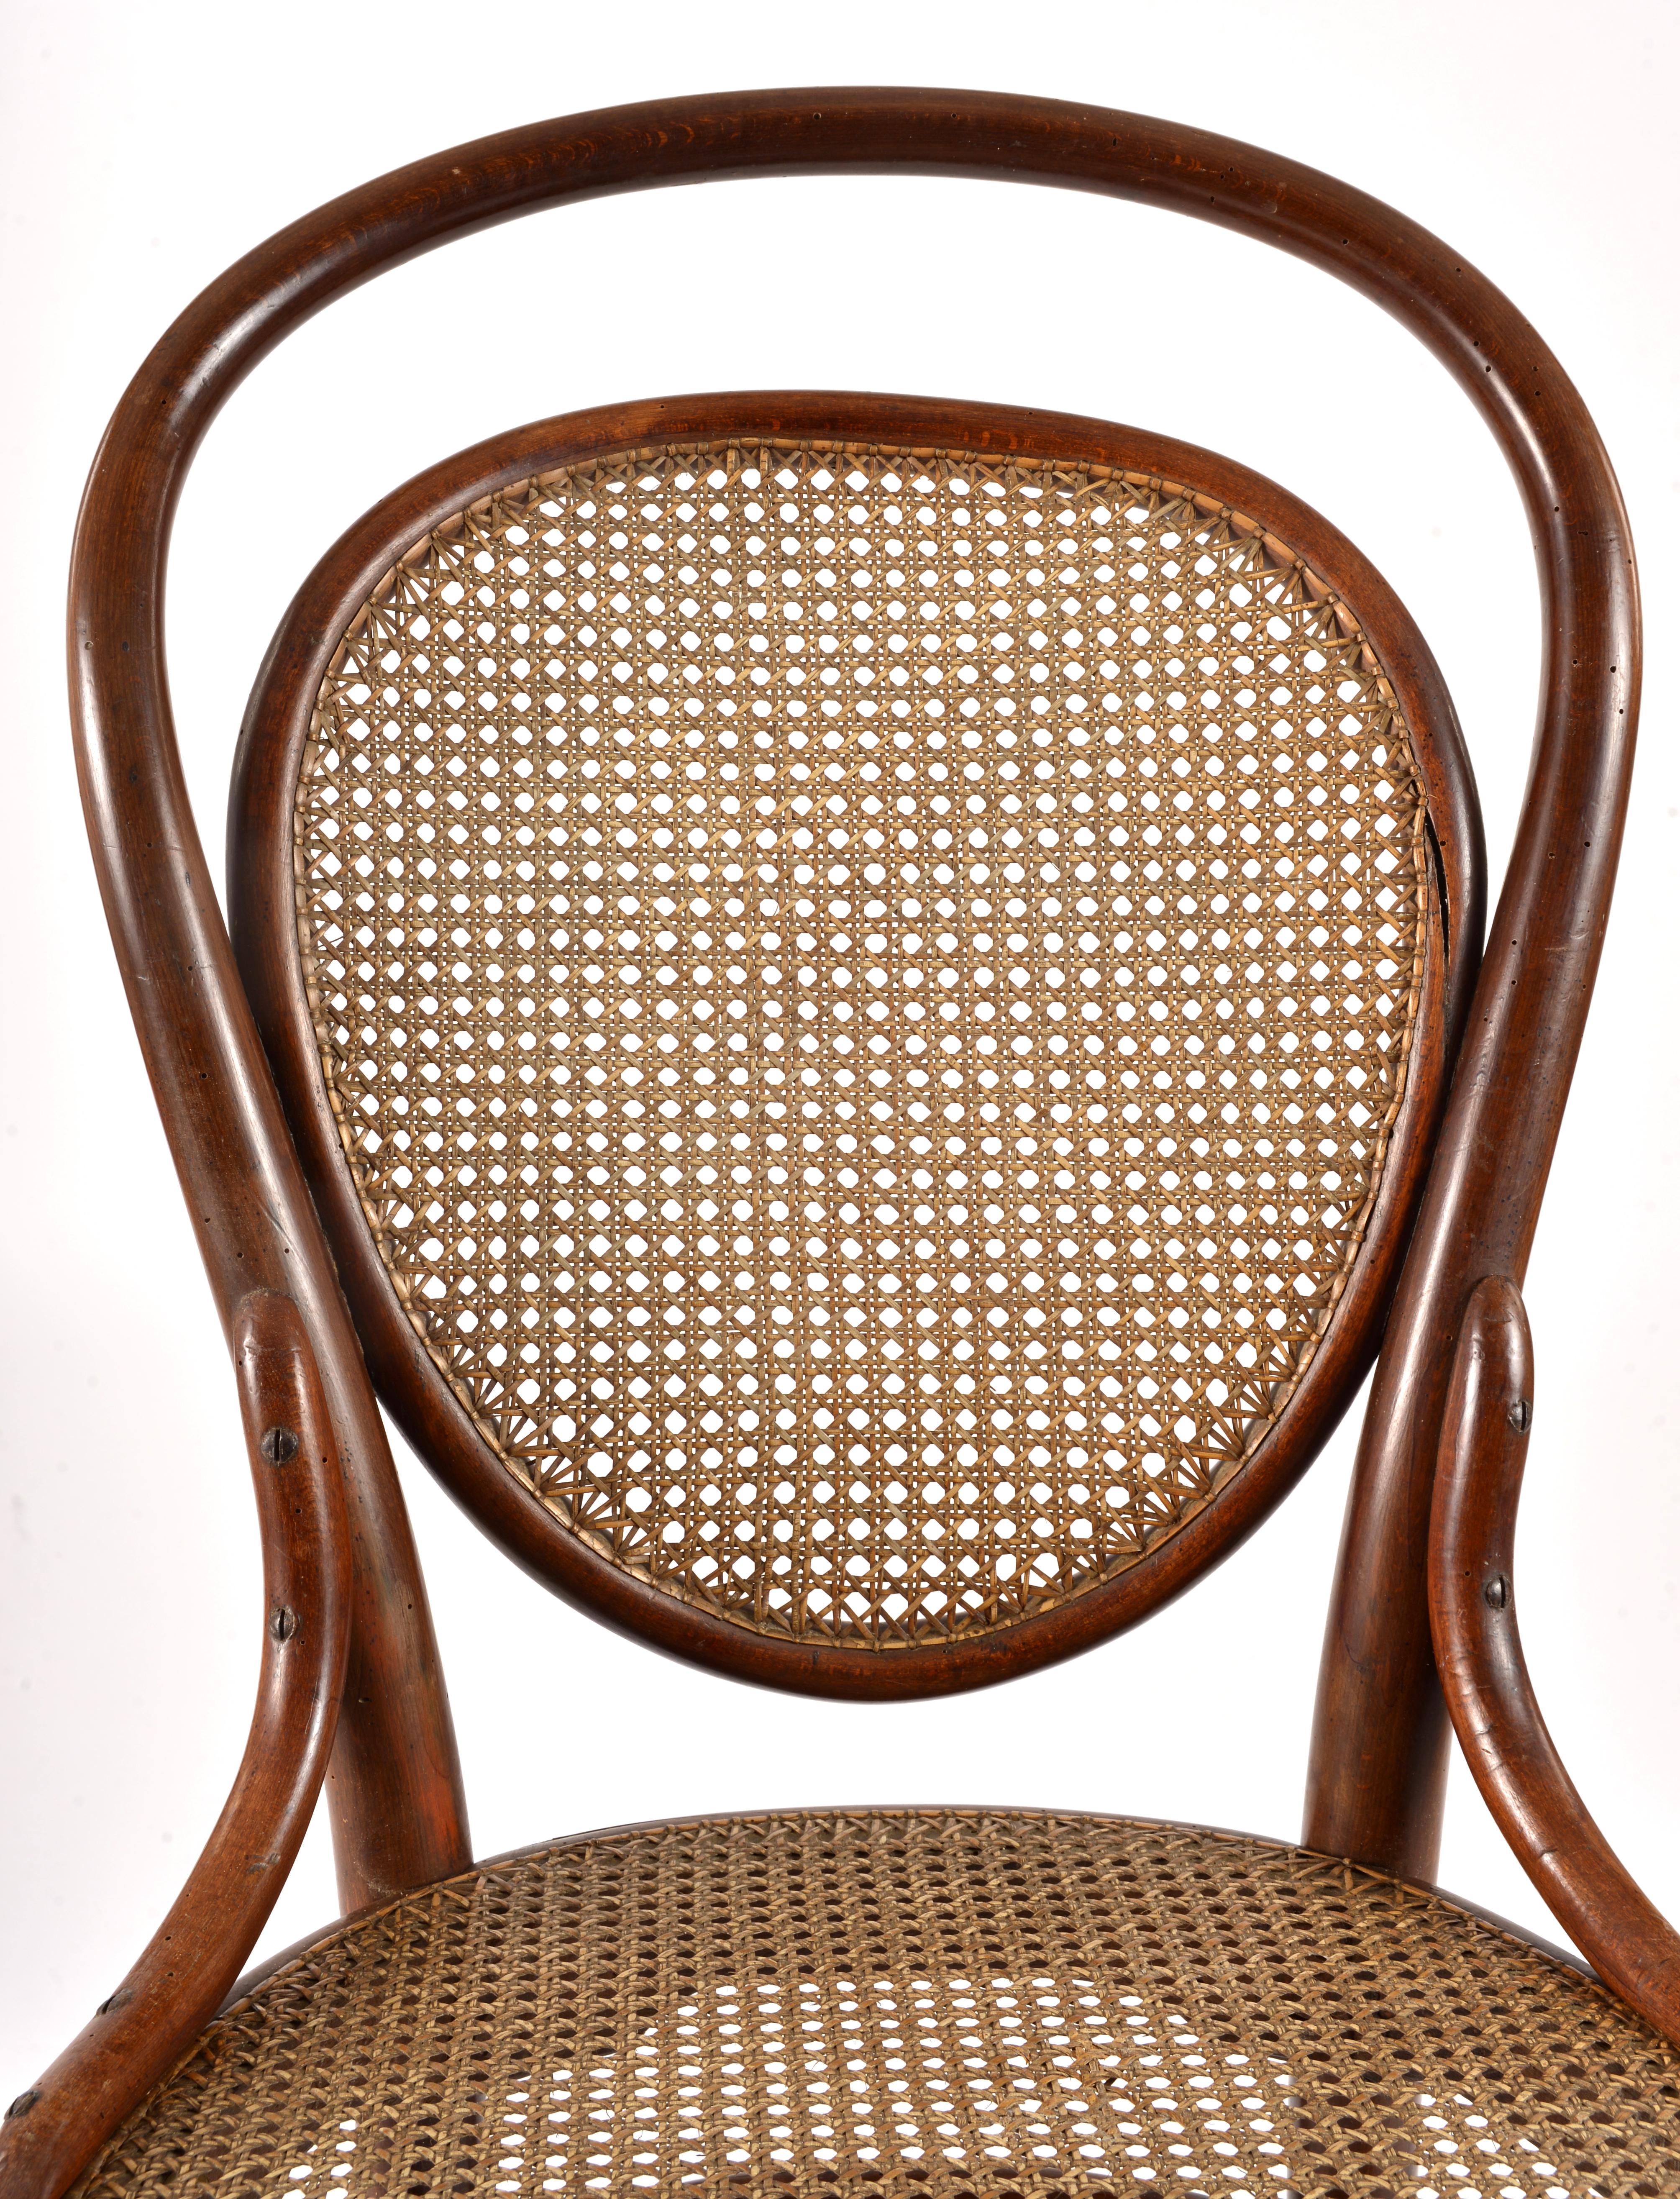 4 bentwood chairs, number 7, published by Thonet at the end of the 19th century. 4